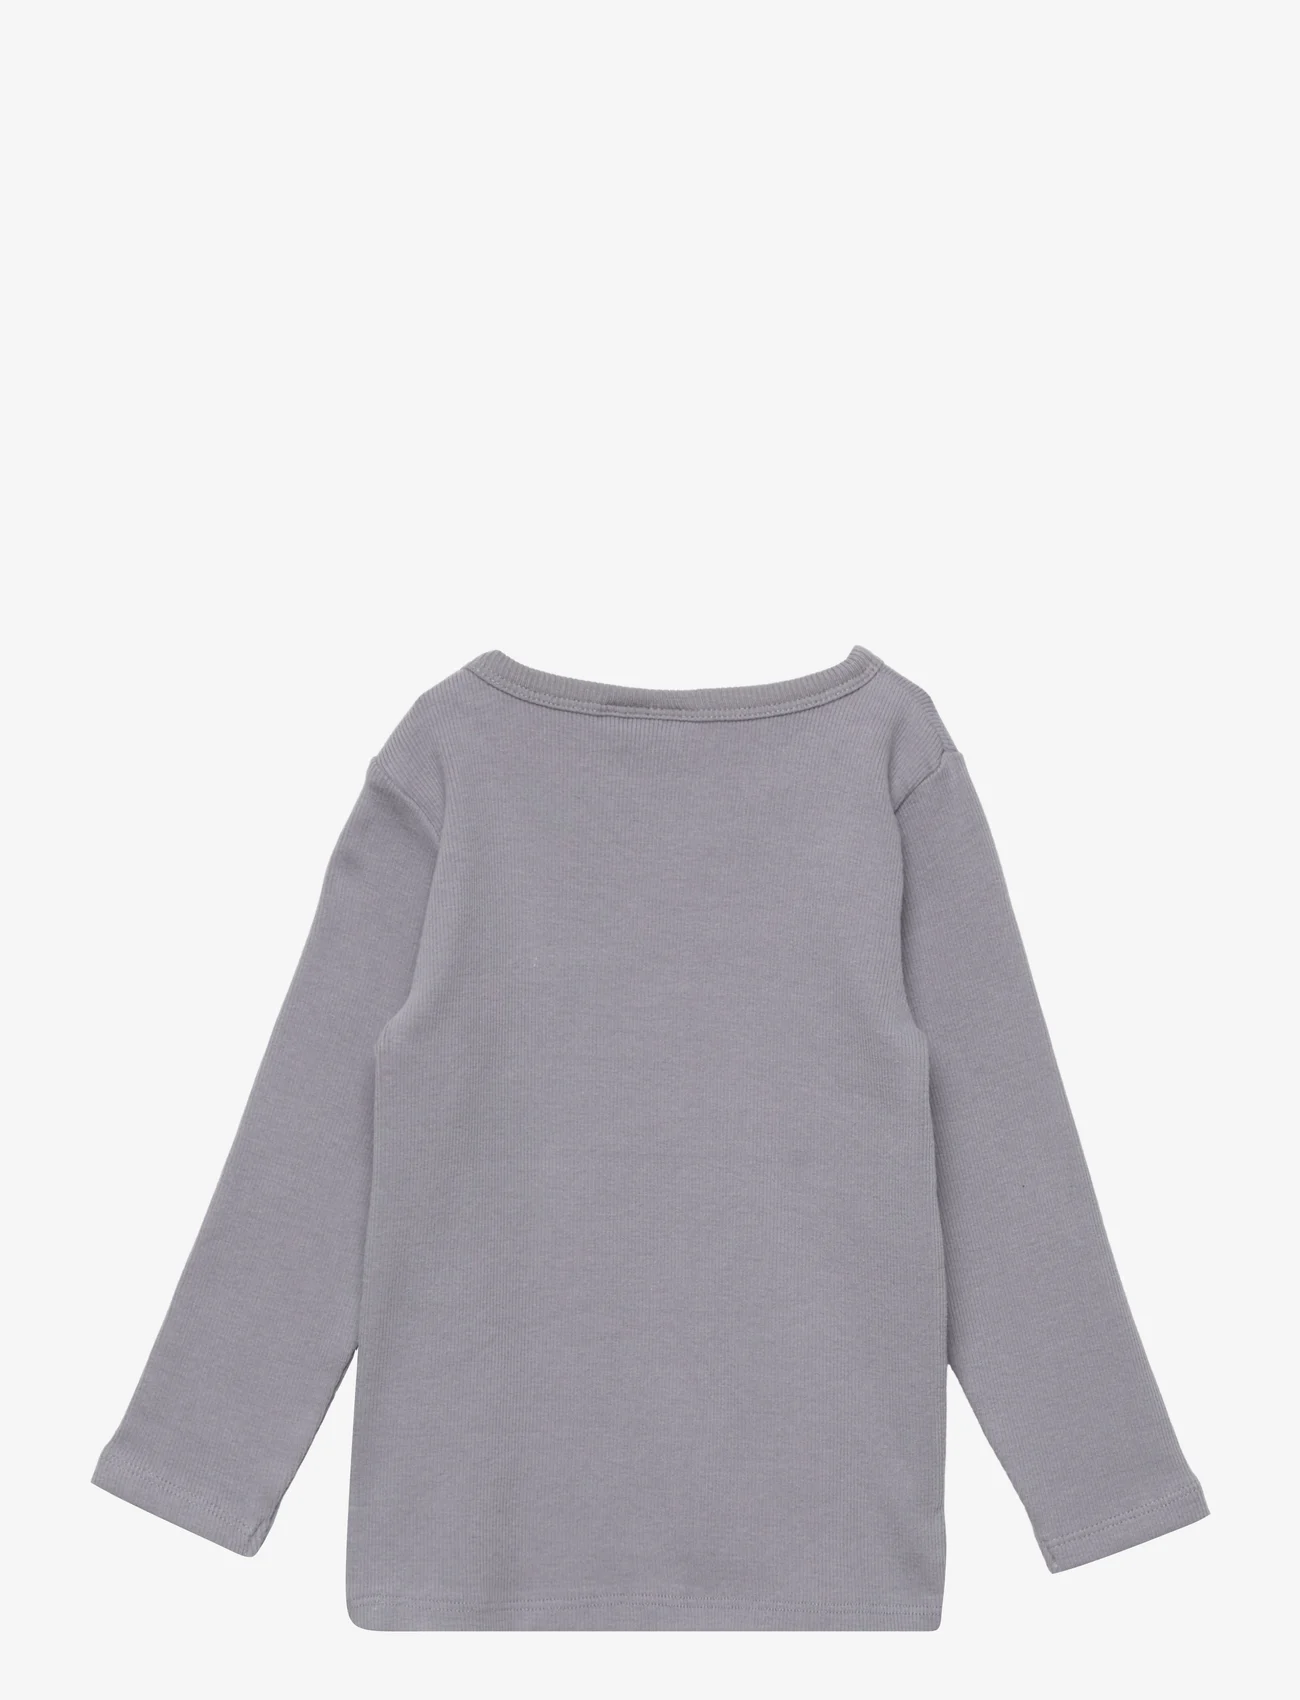 Sofie Schnoor Baby and Kids - T-shirt long-sleeve - langærmede t-shirts - stone blue - 1